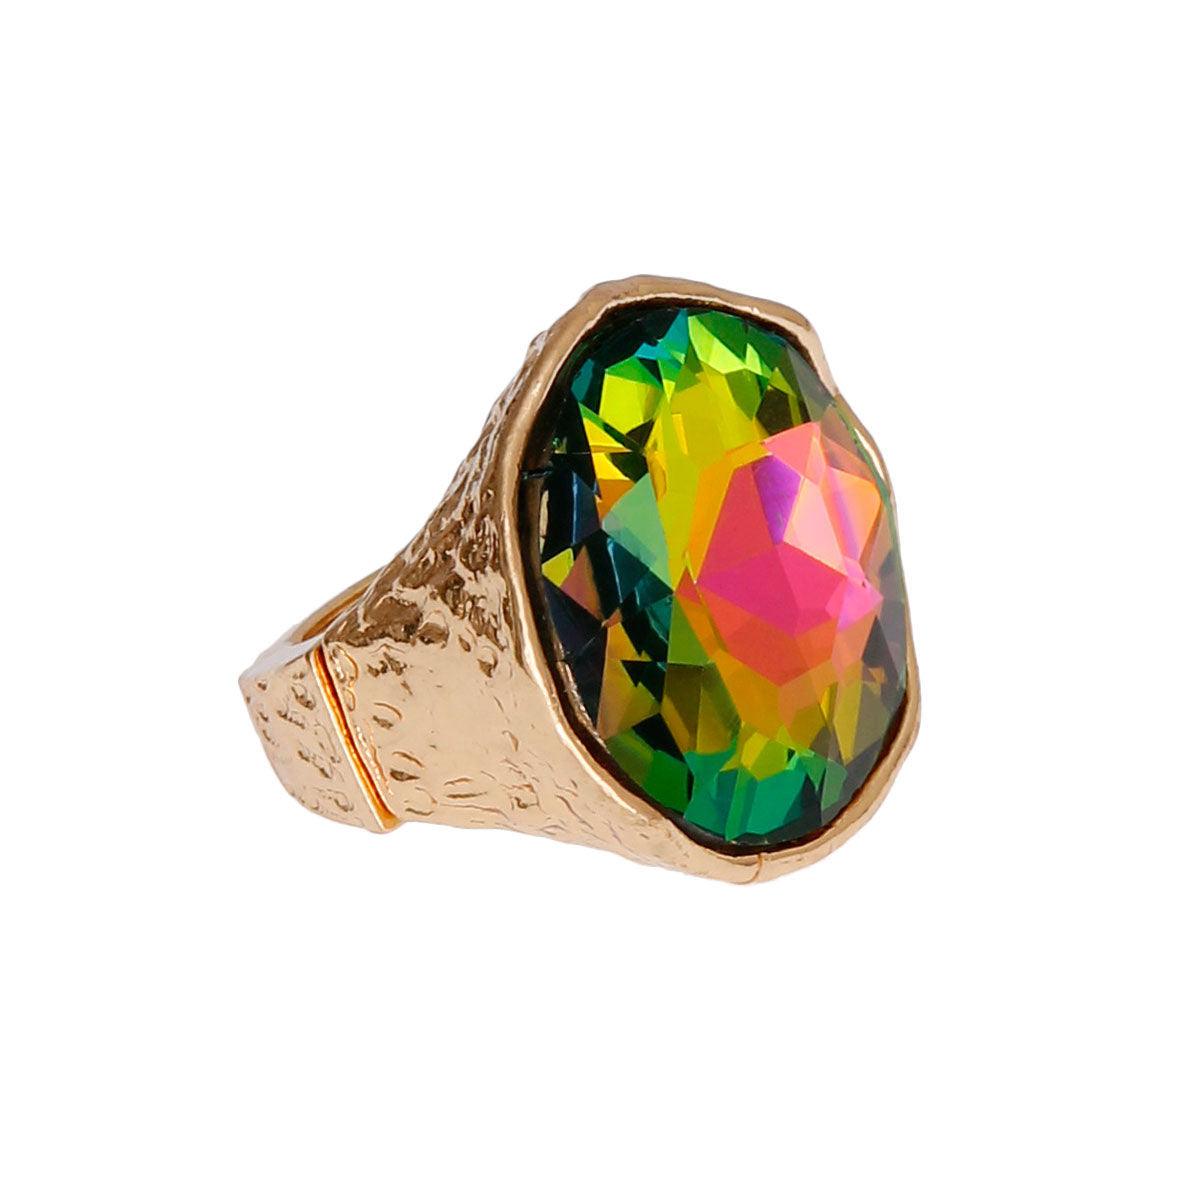 Round Cut Acrylic Aurora Borealis Crystal Ring in Multi Pink and Green